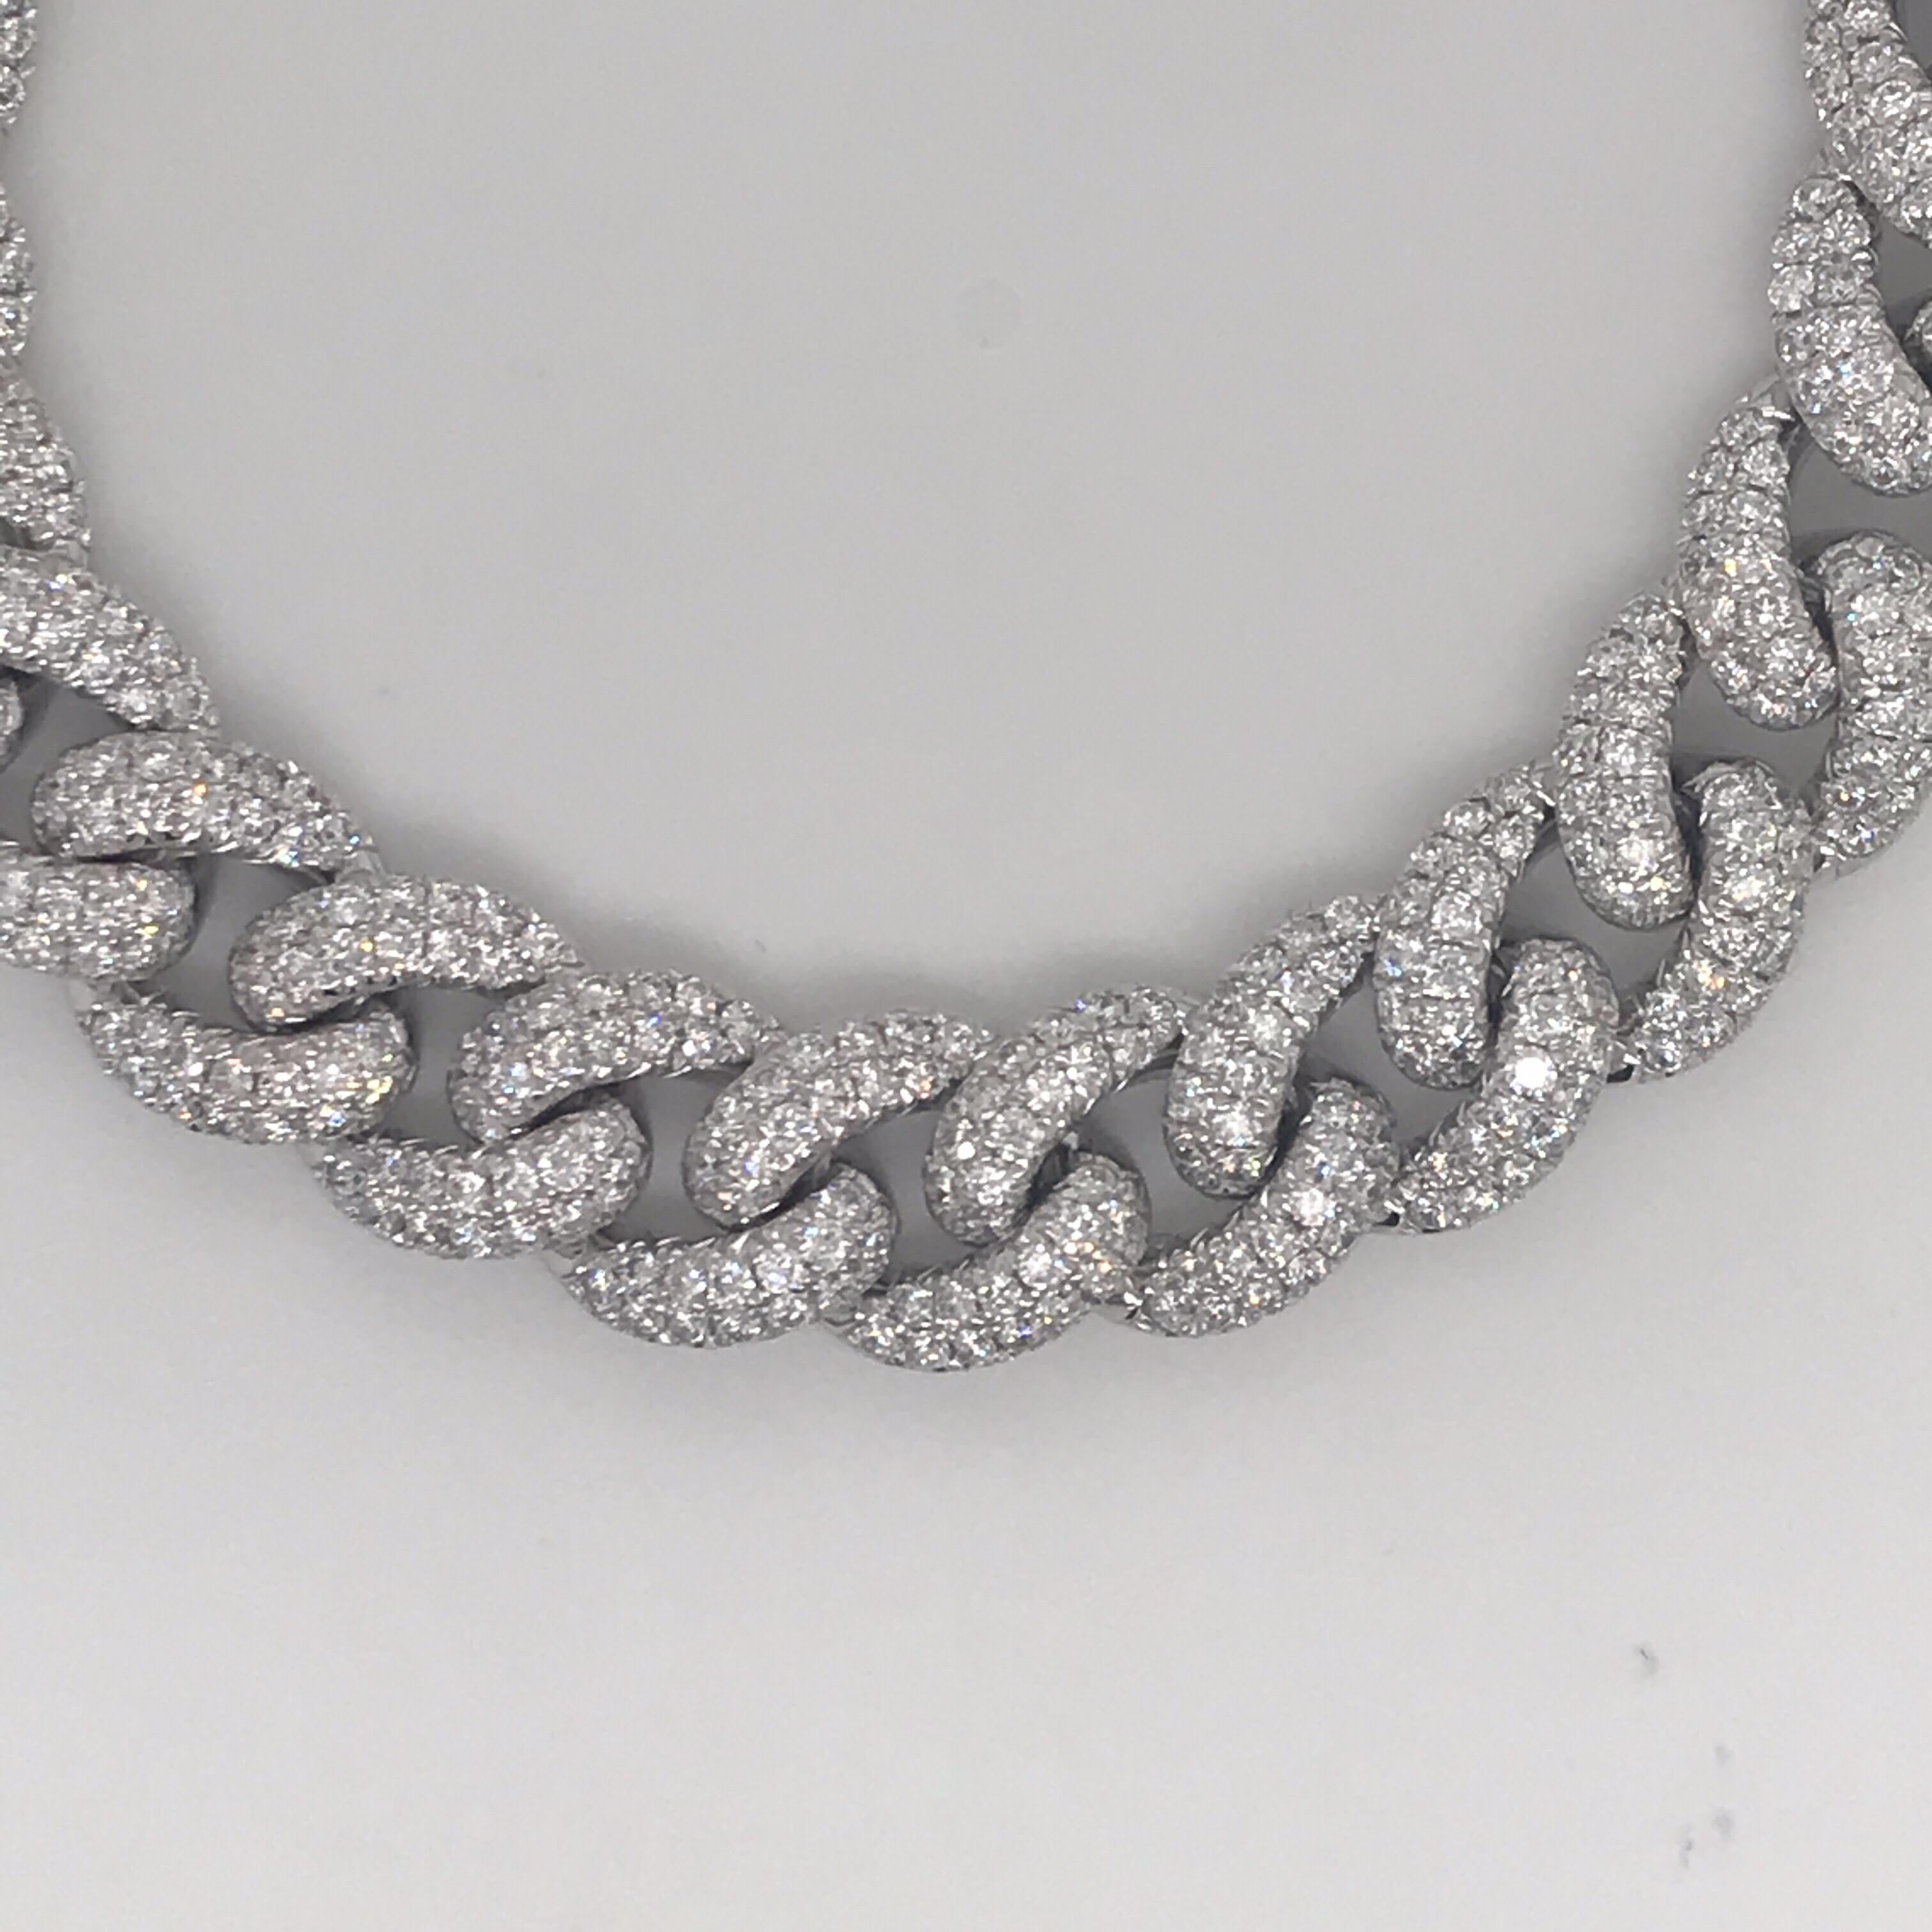 14K White gold Cuban link bracelet featuring 672 diamonds weighing 7.60 carats.
Color F-G
Clarity VS

Available in yellow and rose gold. 